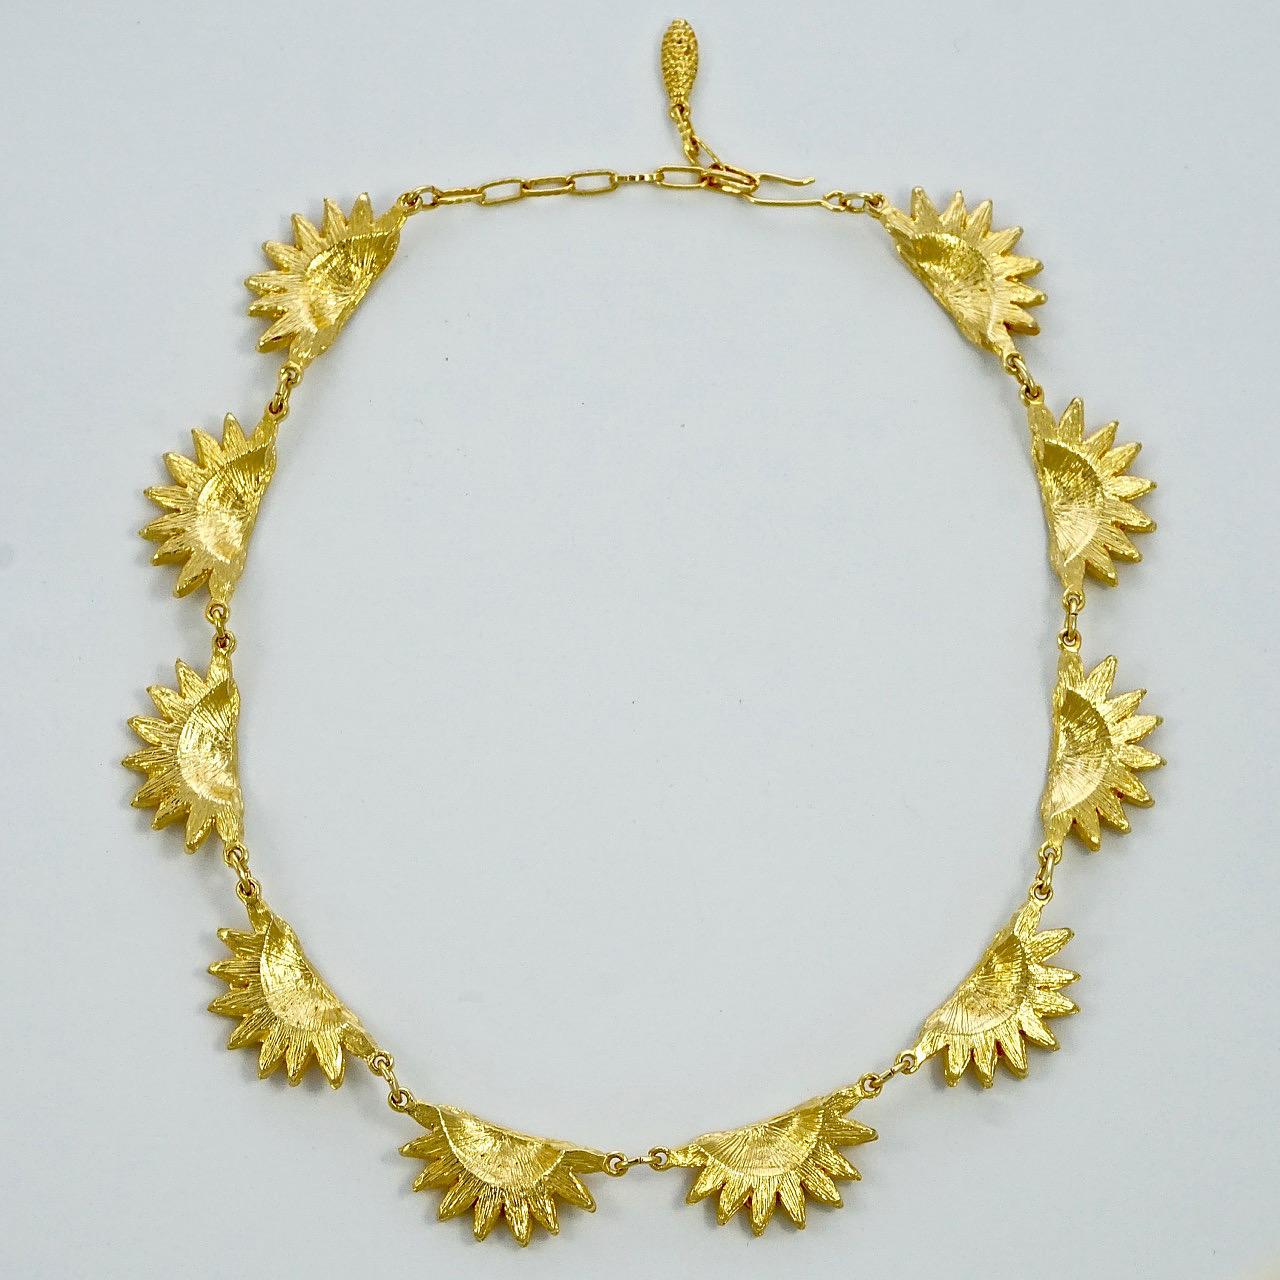 Gold Plated Brushed and Shiny Petal Link Necklace circa 1970s For Sale 3